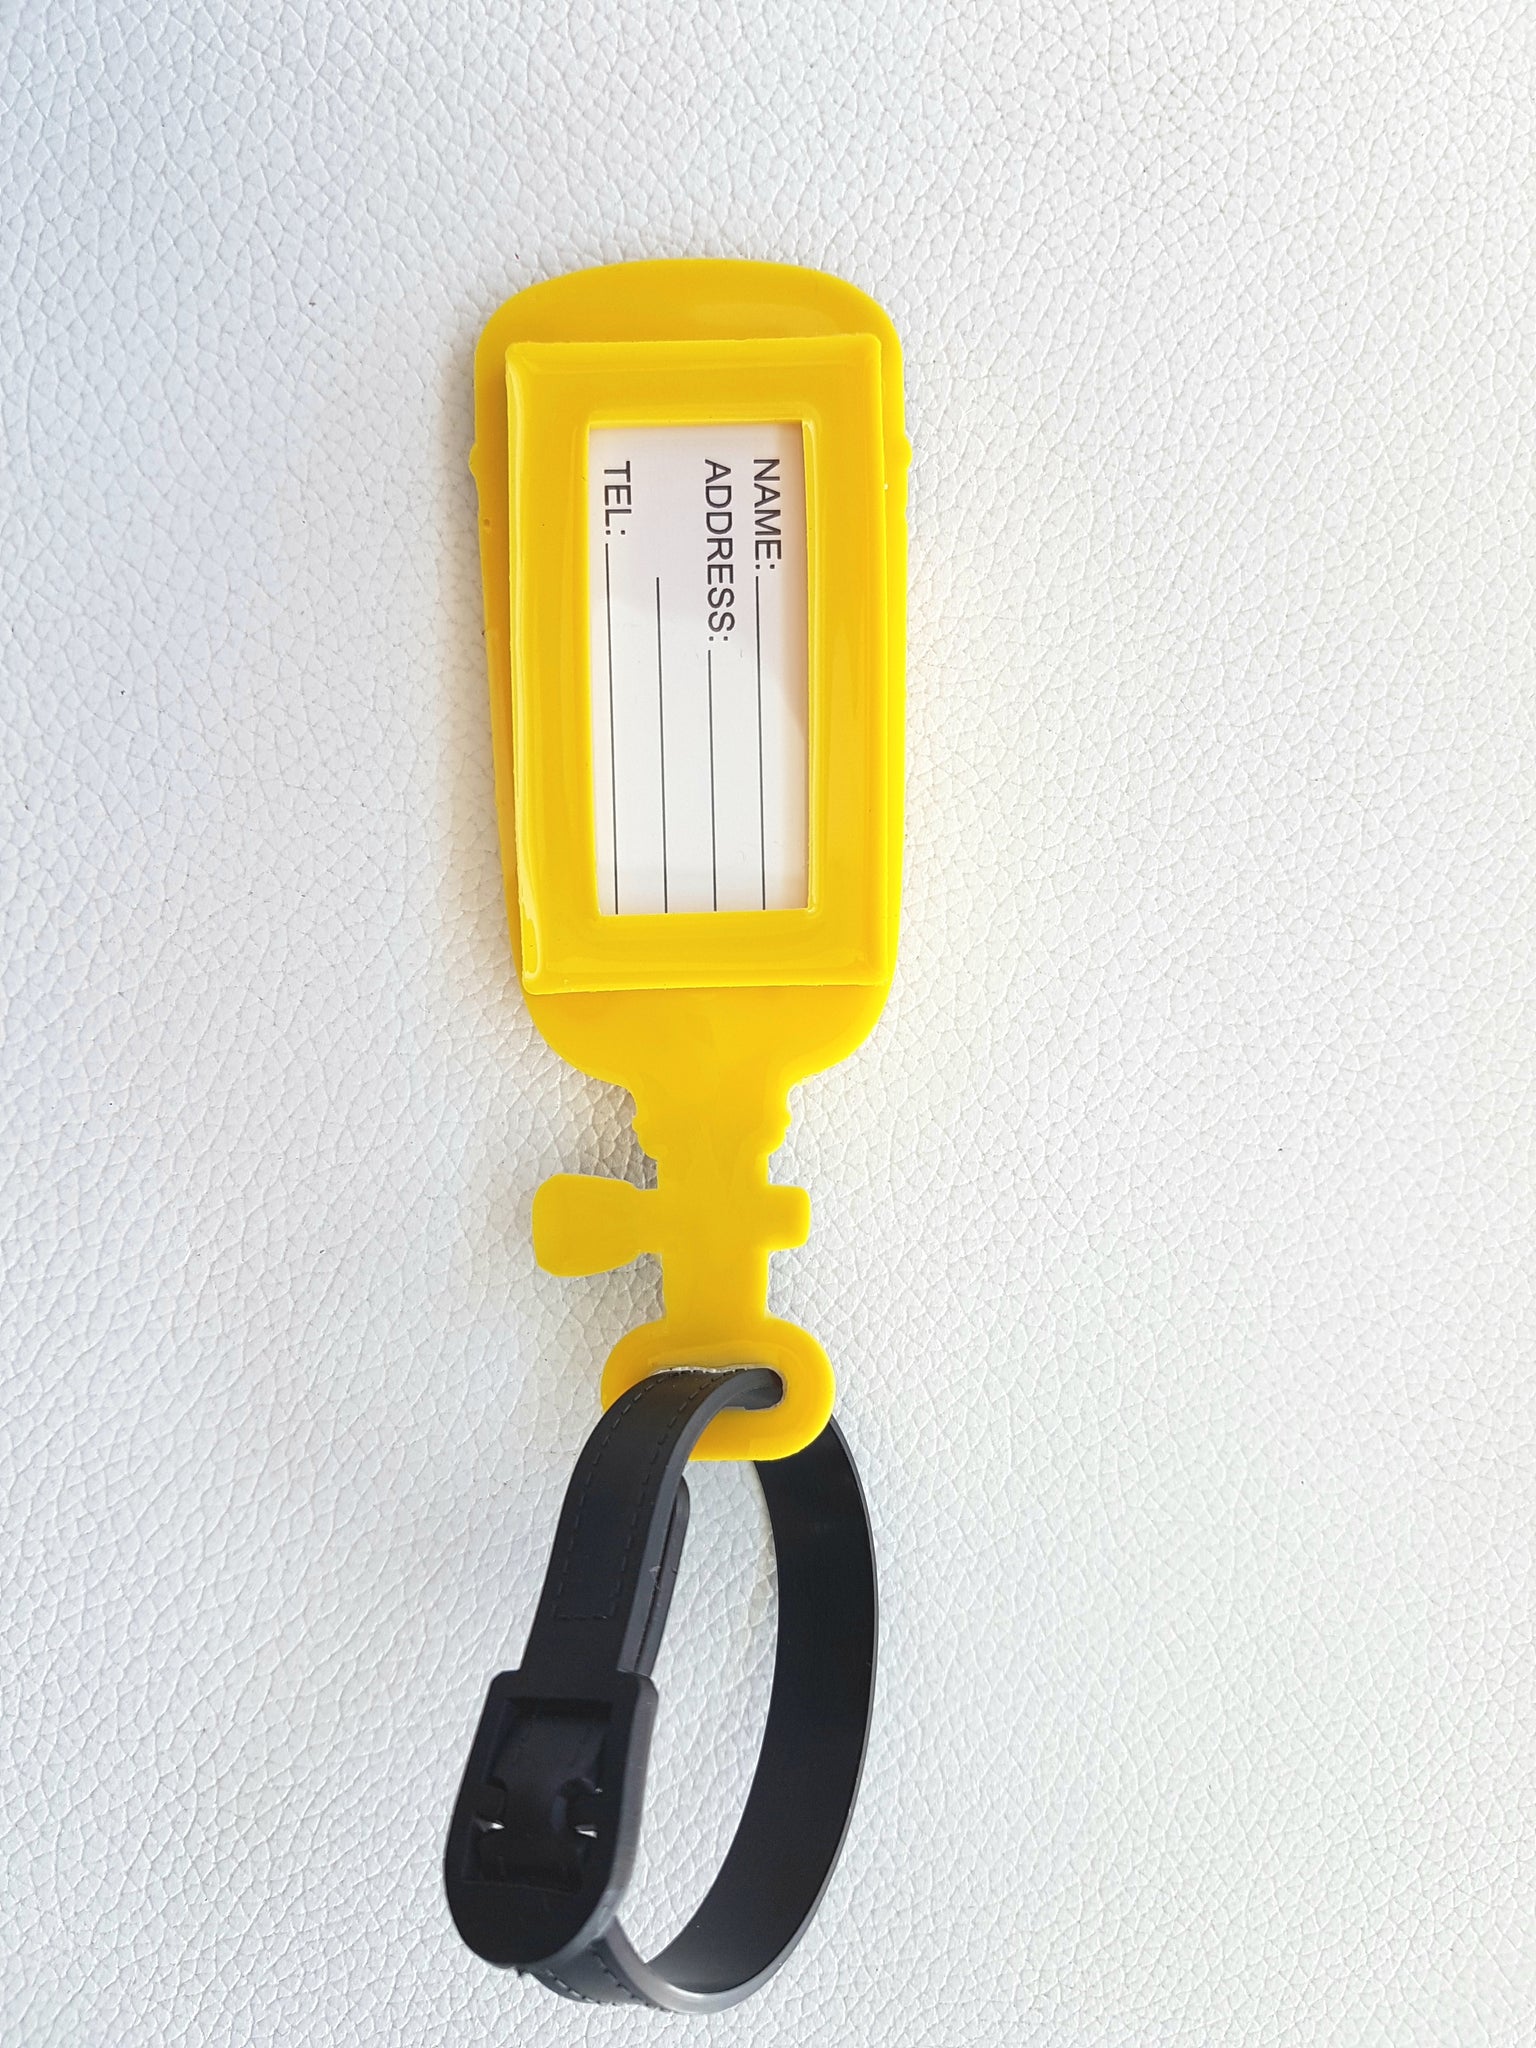 Amazing Scuba Luggage Tag, Diving Specials, Scuba Gifts, Ocean lover, yellow Luggage Tag